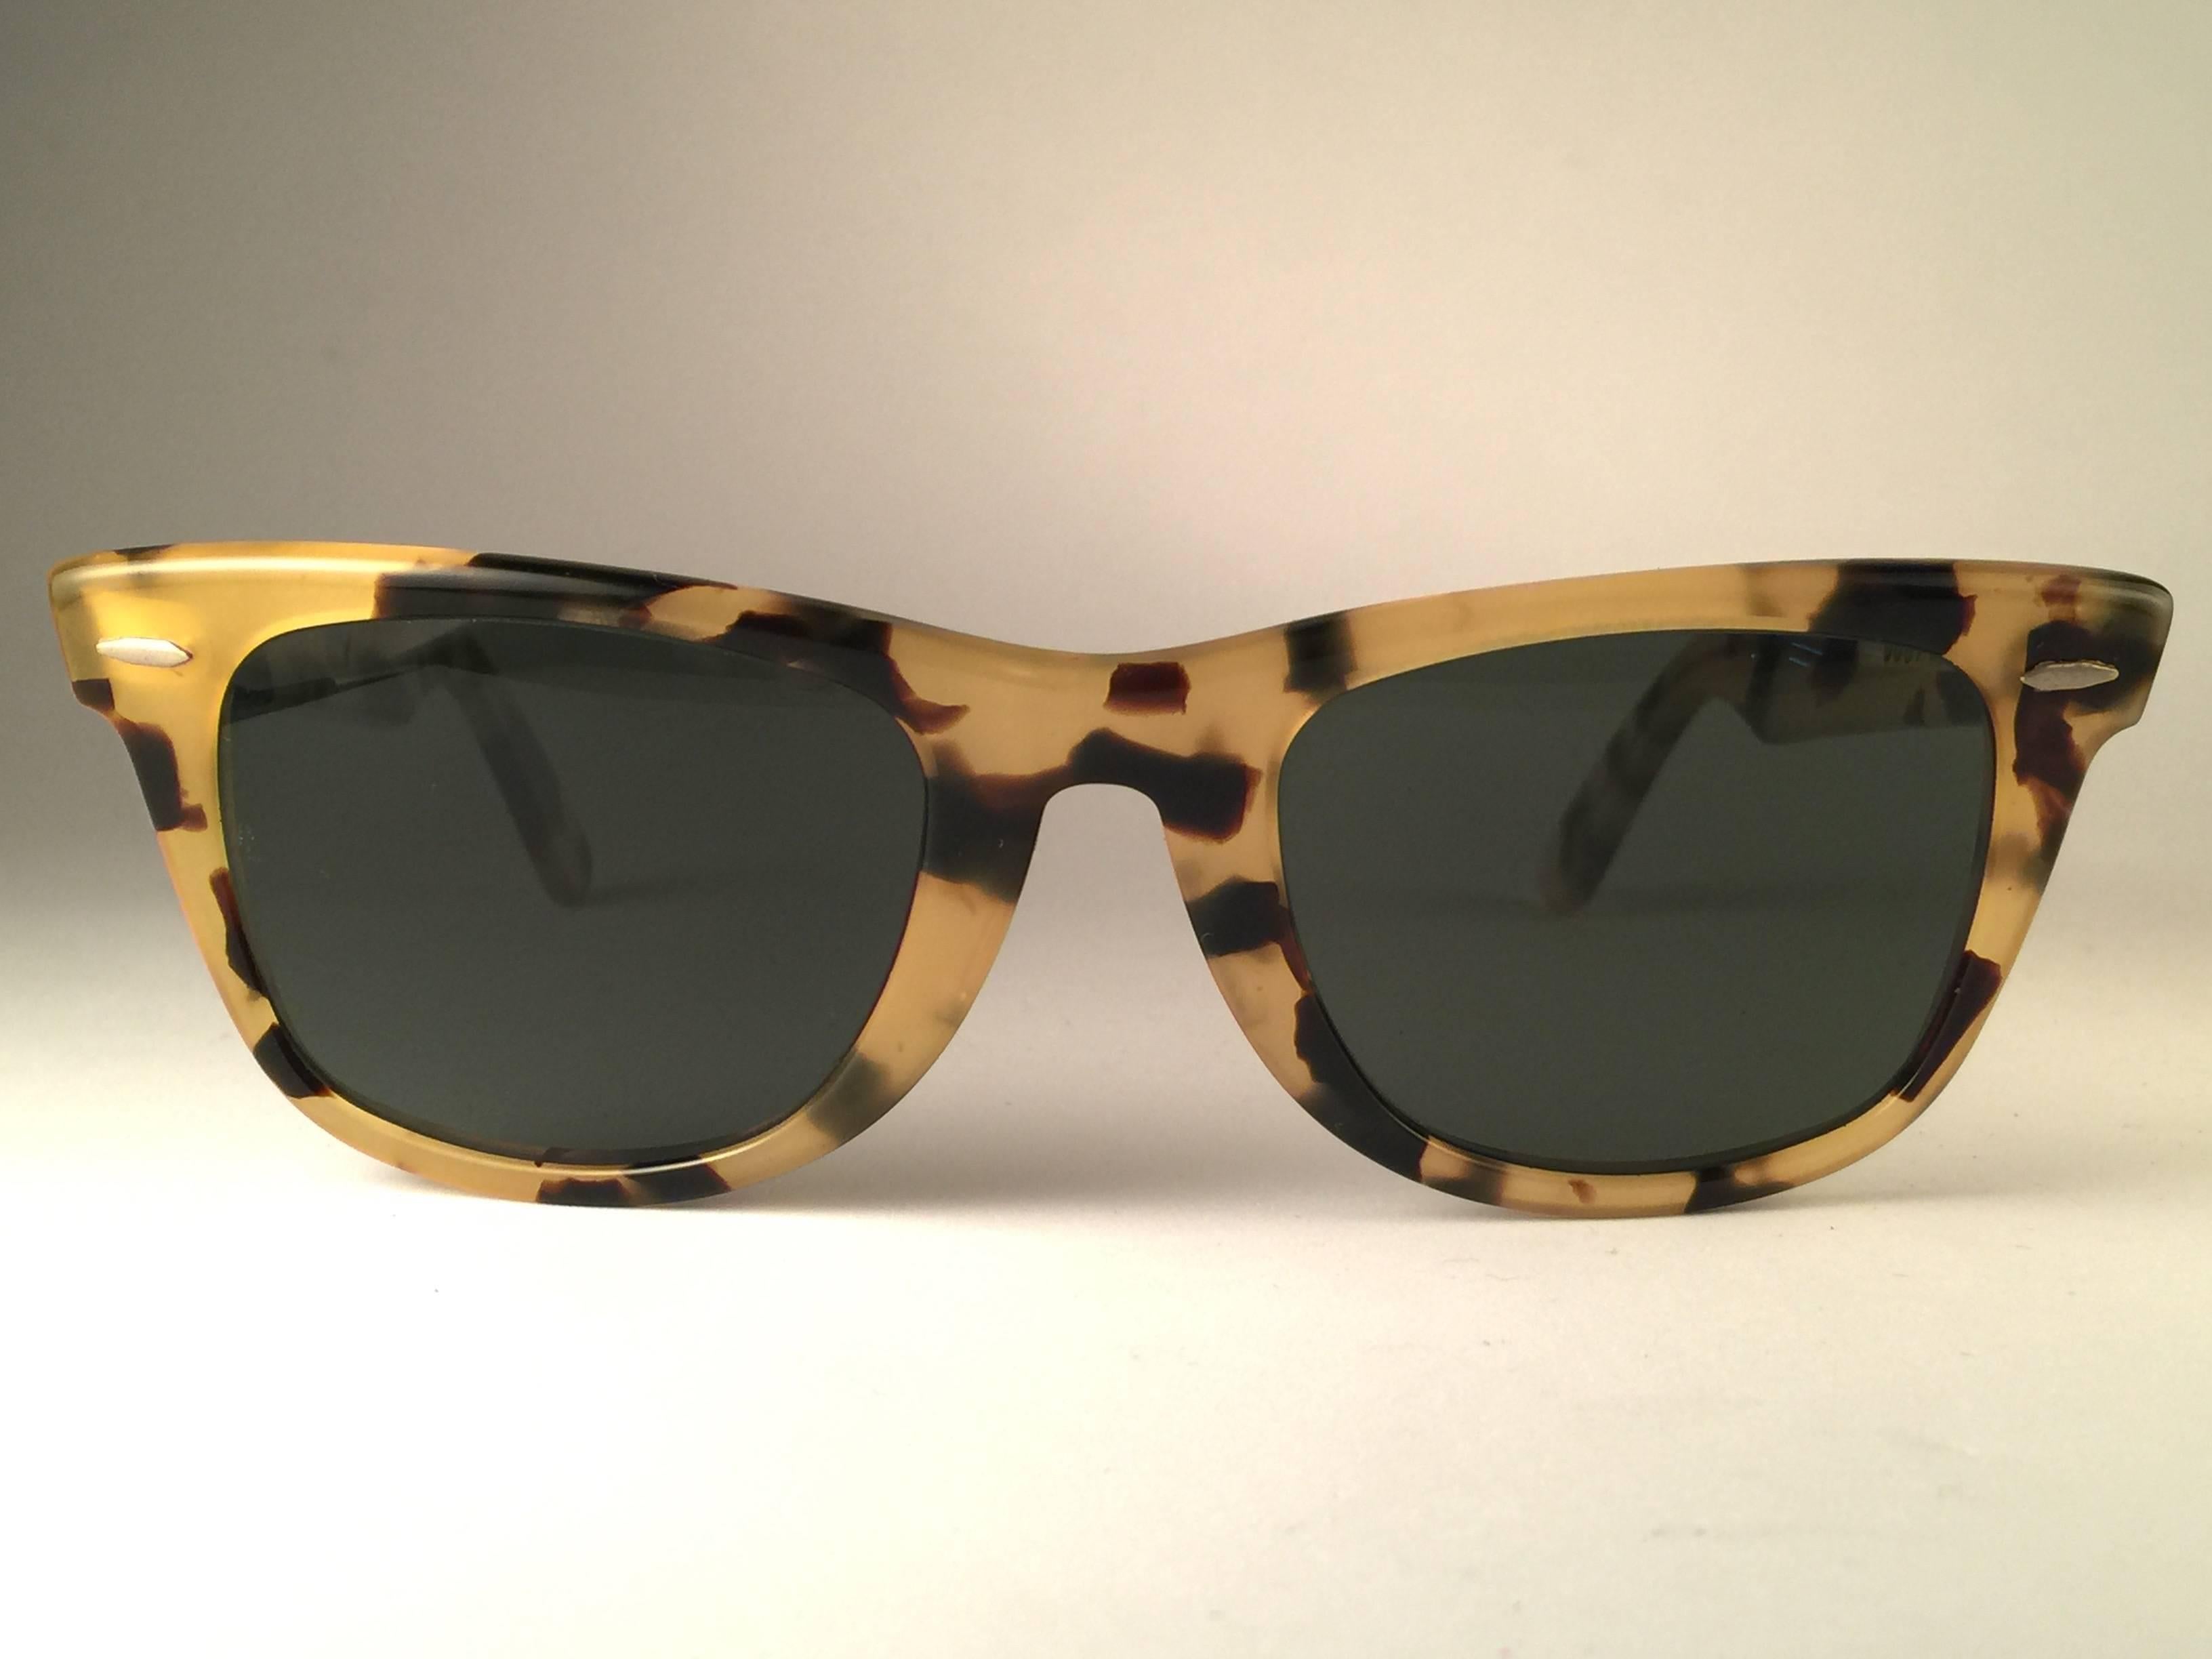 New classic Wayfarer in light tortoise. 
B&L etched in both G15 grey lenses. Please notice that this item is nearly 40 years old and show some storage wear.  

Made in USA.